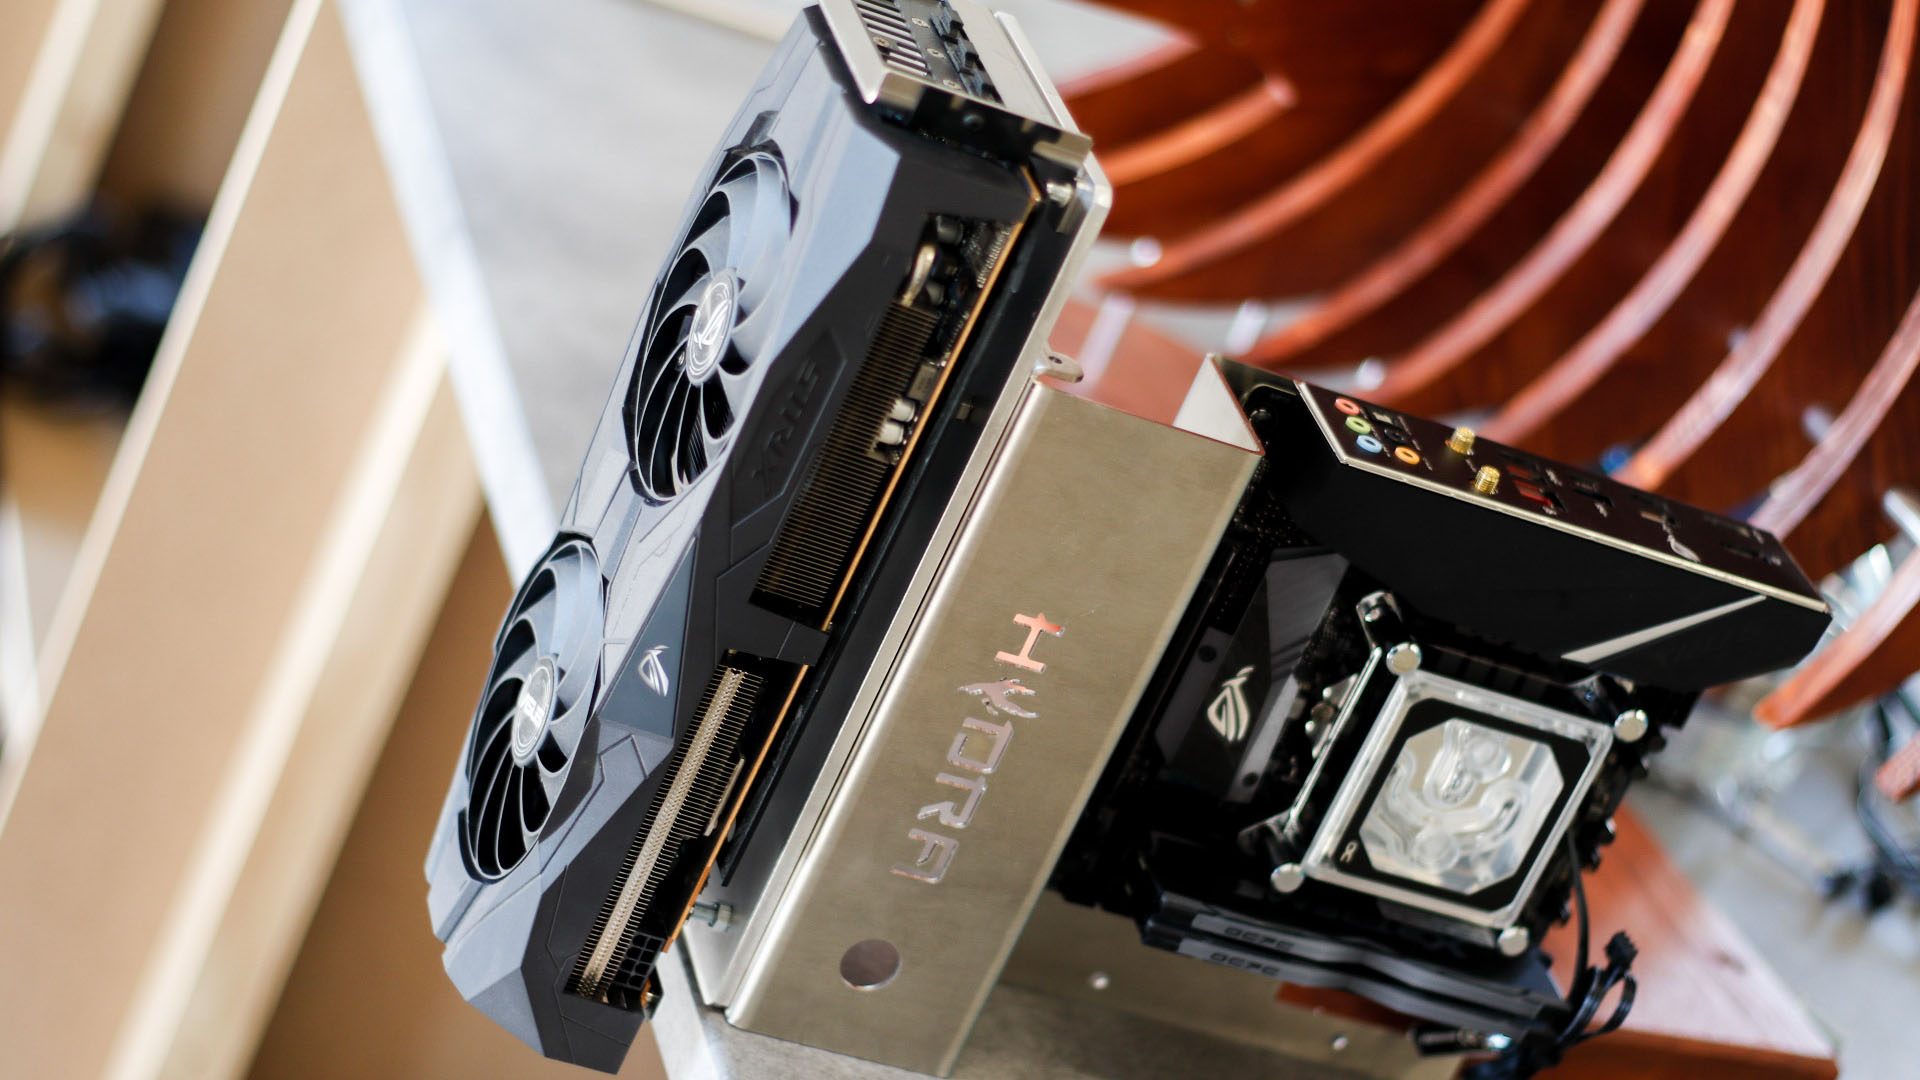 The graphics card mount in the wooden wave mini itx pc